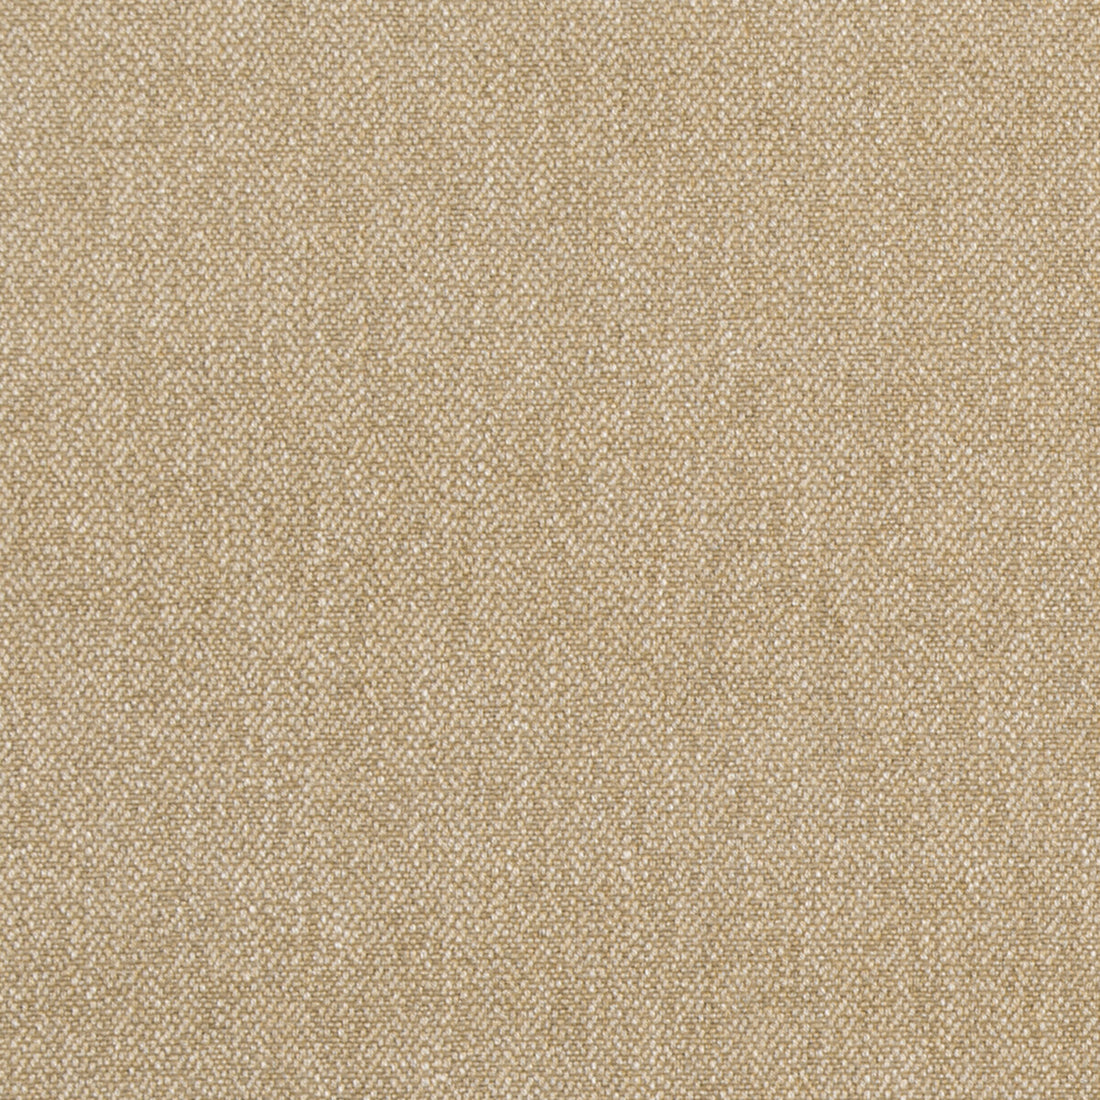 Verdure fabric in biscuit color - pattern ED85175.235.0 - by Threads in the Threads Colour Library collection